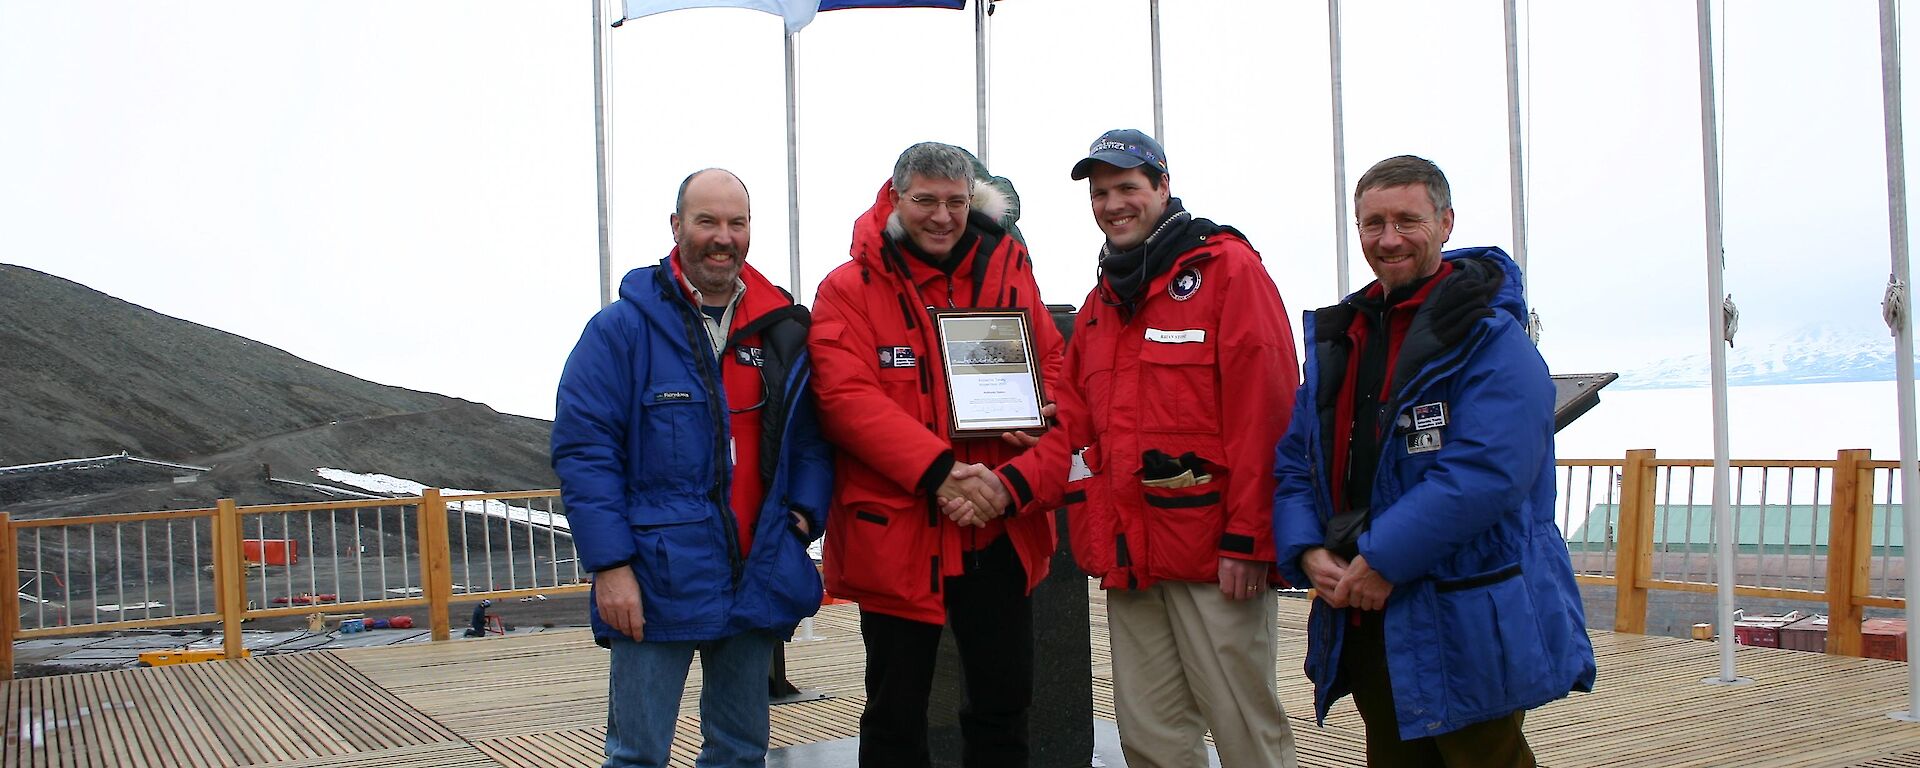 The observer team making a presentation to Brian Stone (3rd from left), the Senior Representative of the National Science Foundation, at the conclusion of the inspection of McMurdo Station.